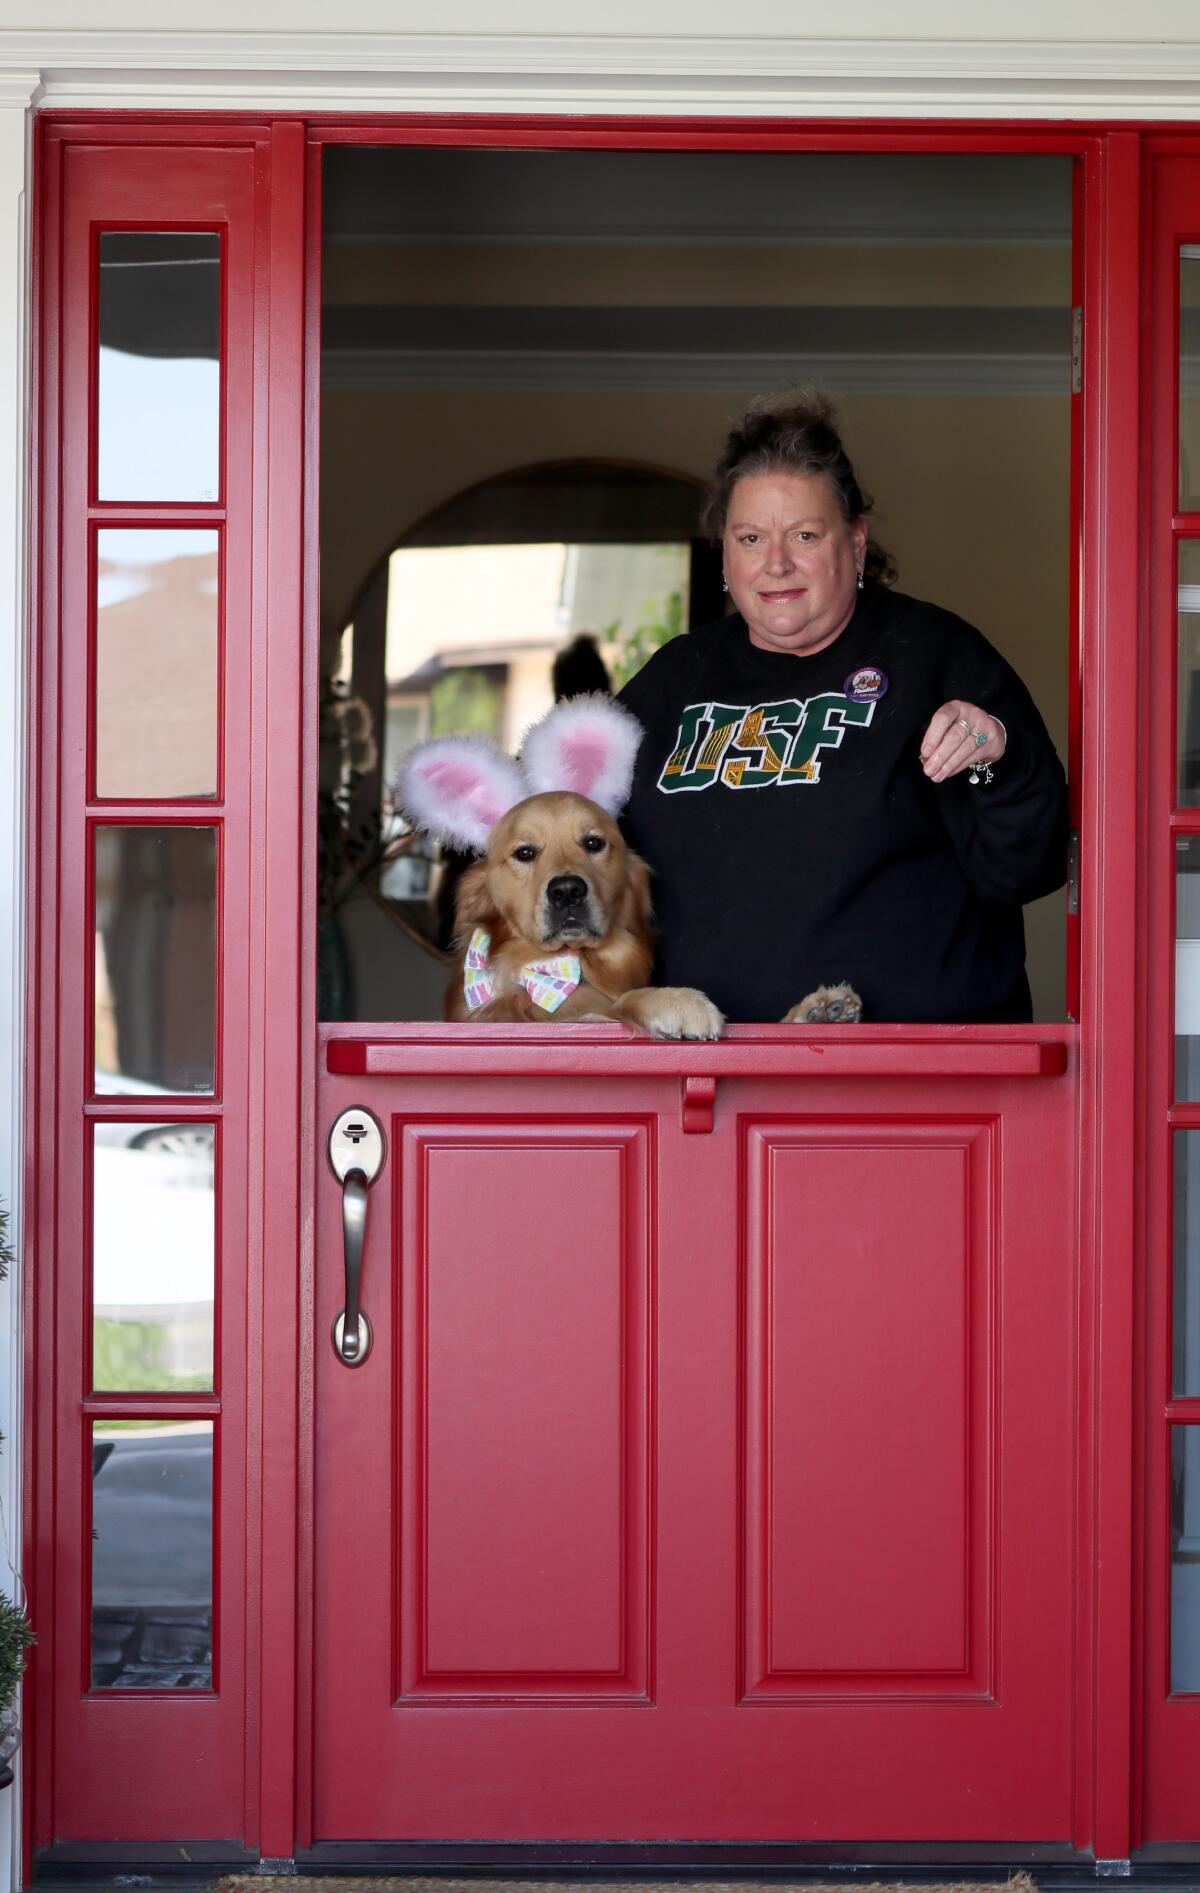 Fletcher, a two-year old golden retriever wearing bunny ears and a bow tie, is pictured with owner Ellen Kuhnert.